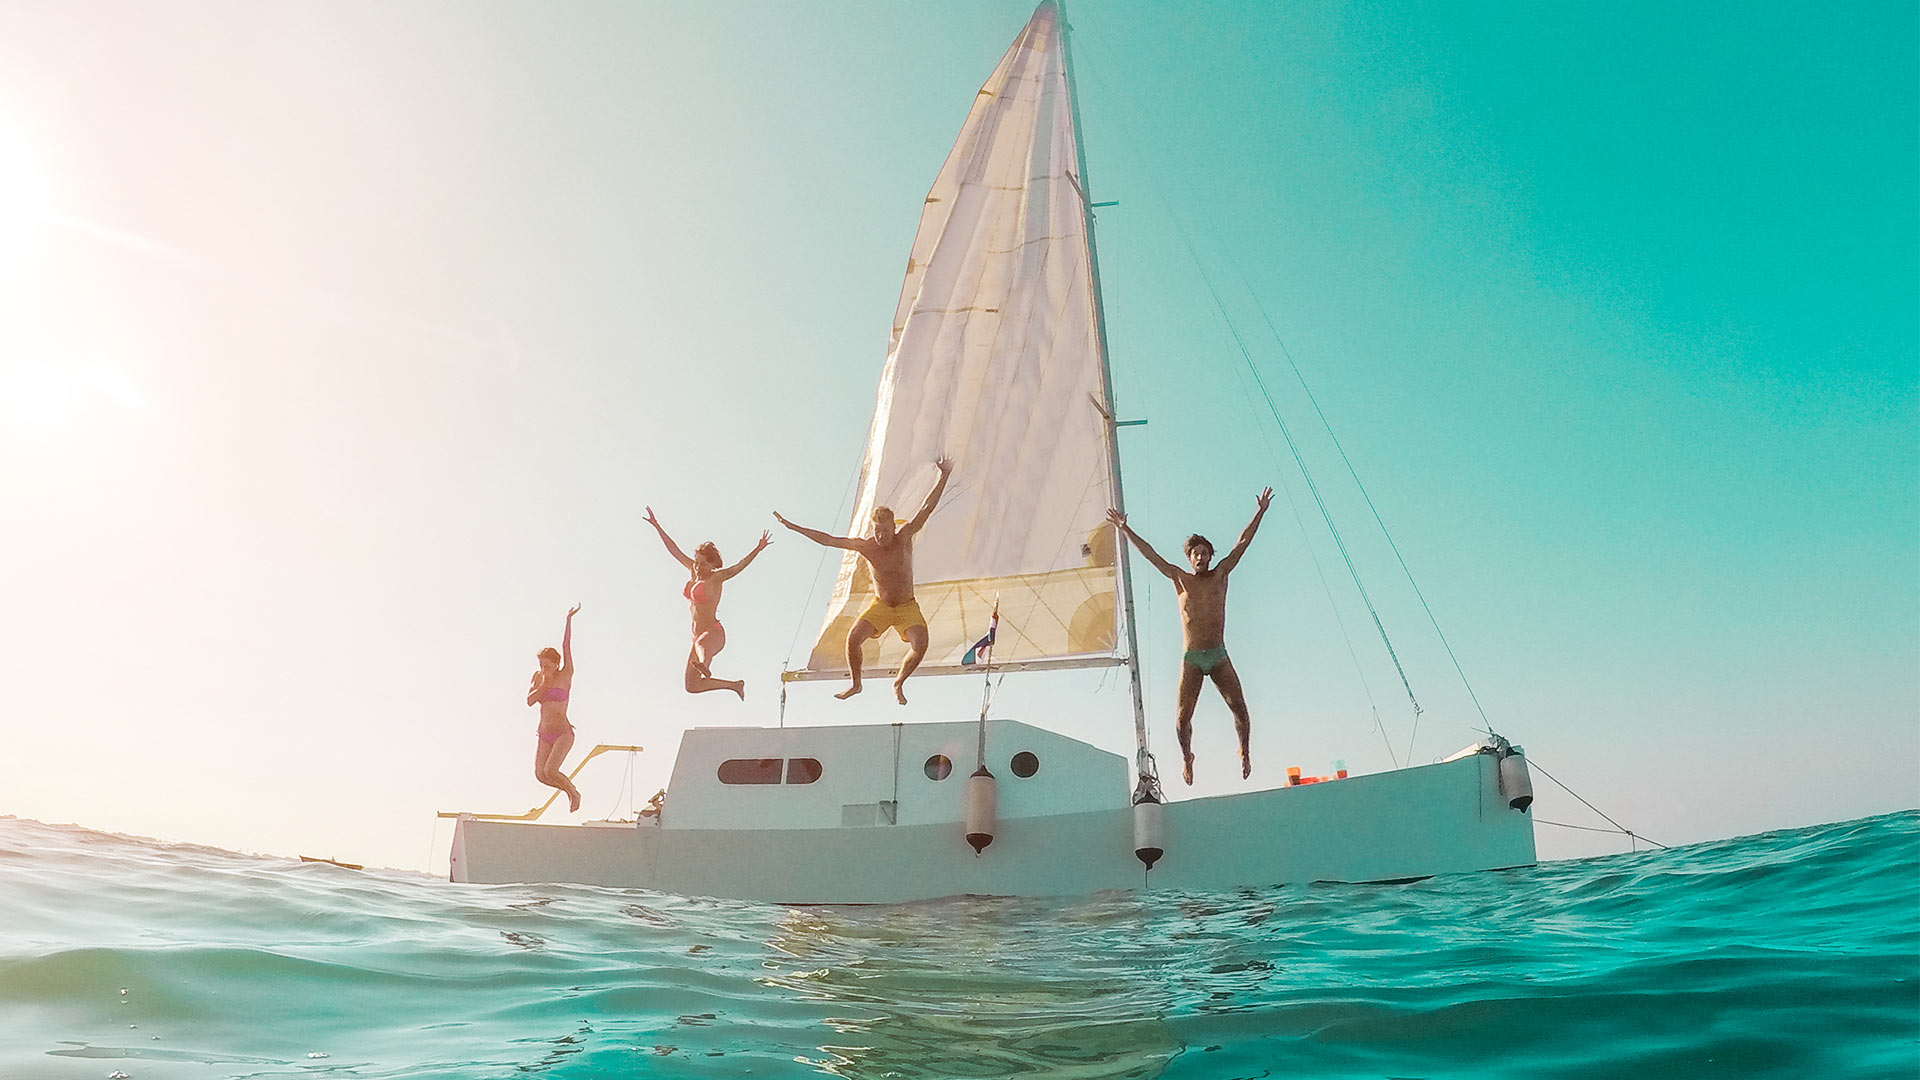 happy-crazy-friends-diving-from-sailing-boat-into-2021-09-03-13-36-52-utc